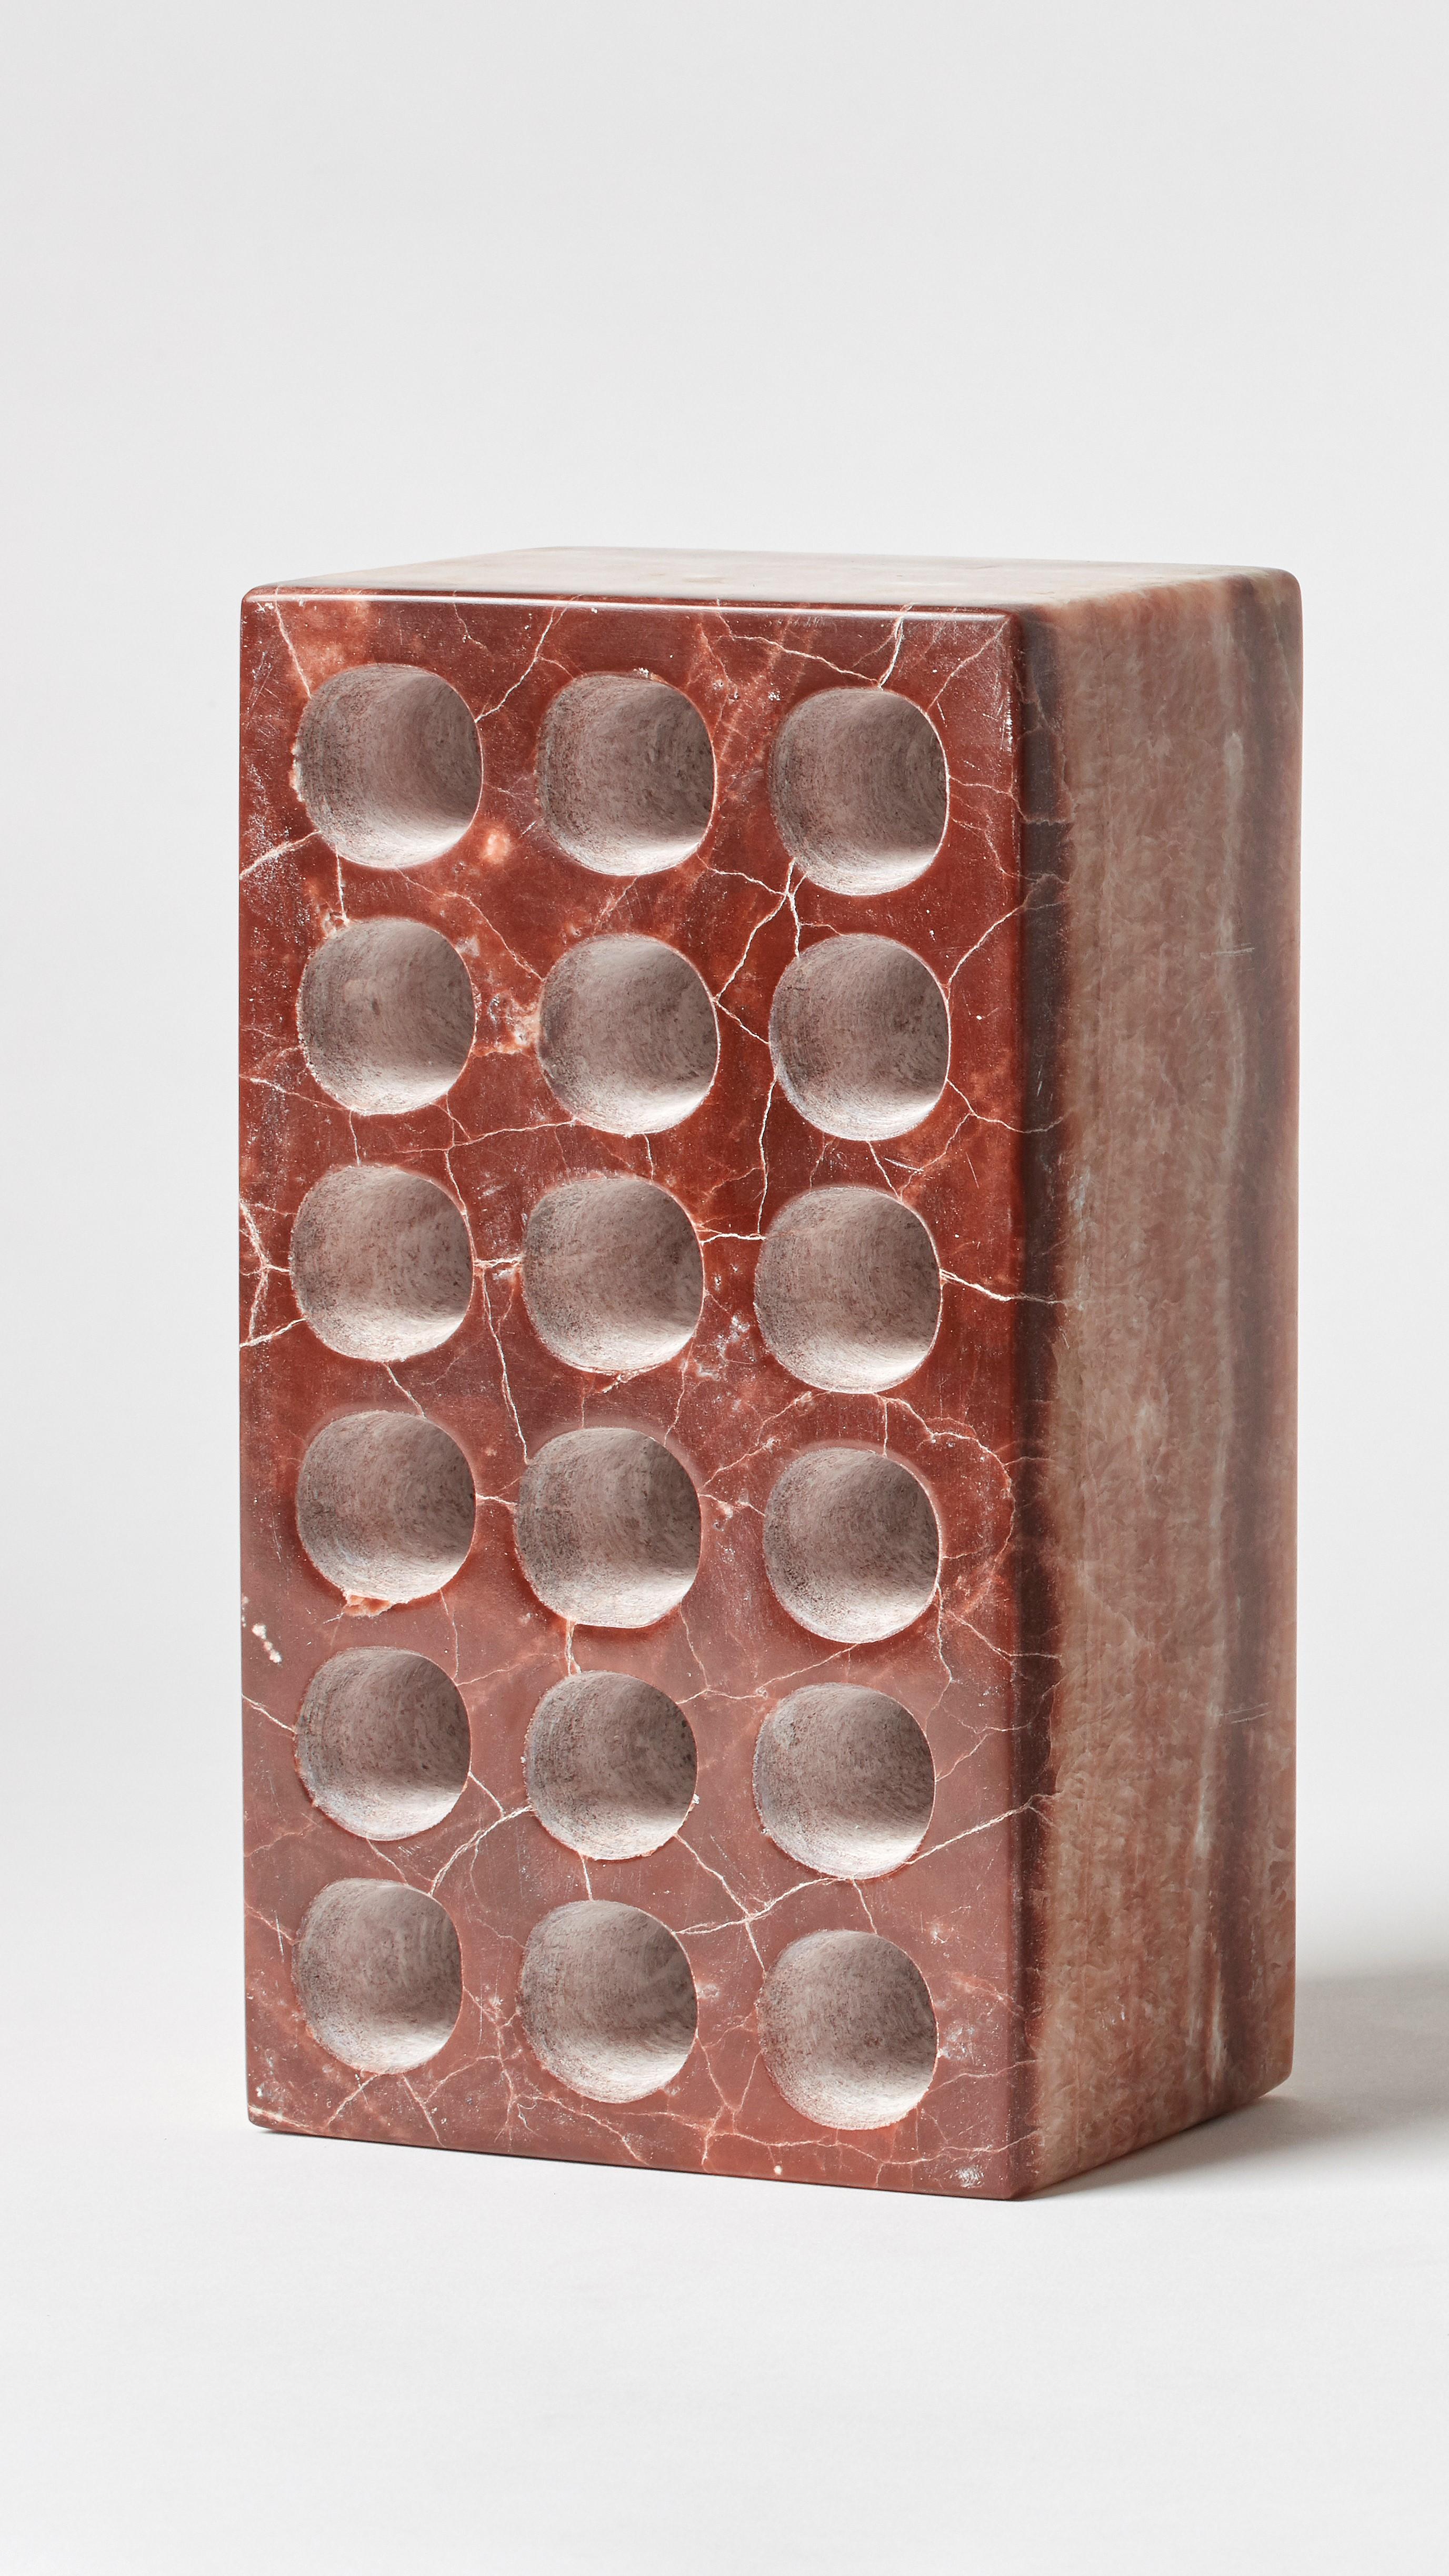 BRICK by Estudio Rafael Freyre
Dimensions: W 12.5 D 9 x H 23 cm 
Materials: Andes Stones
Also Available: Other finishes available.

The brick is a generic constructive element that constitutes part of the urban imaginary. In Peru, moreover, its